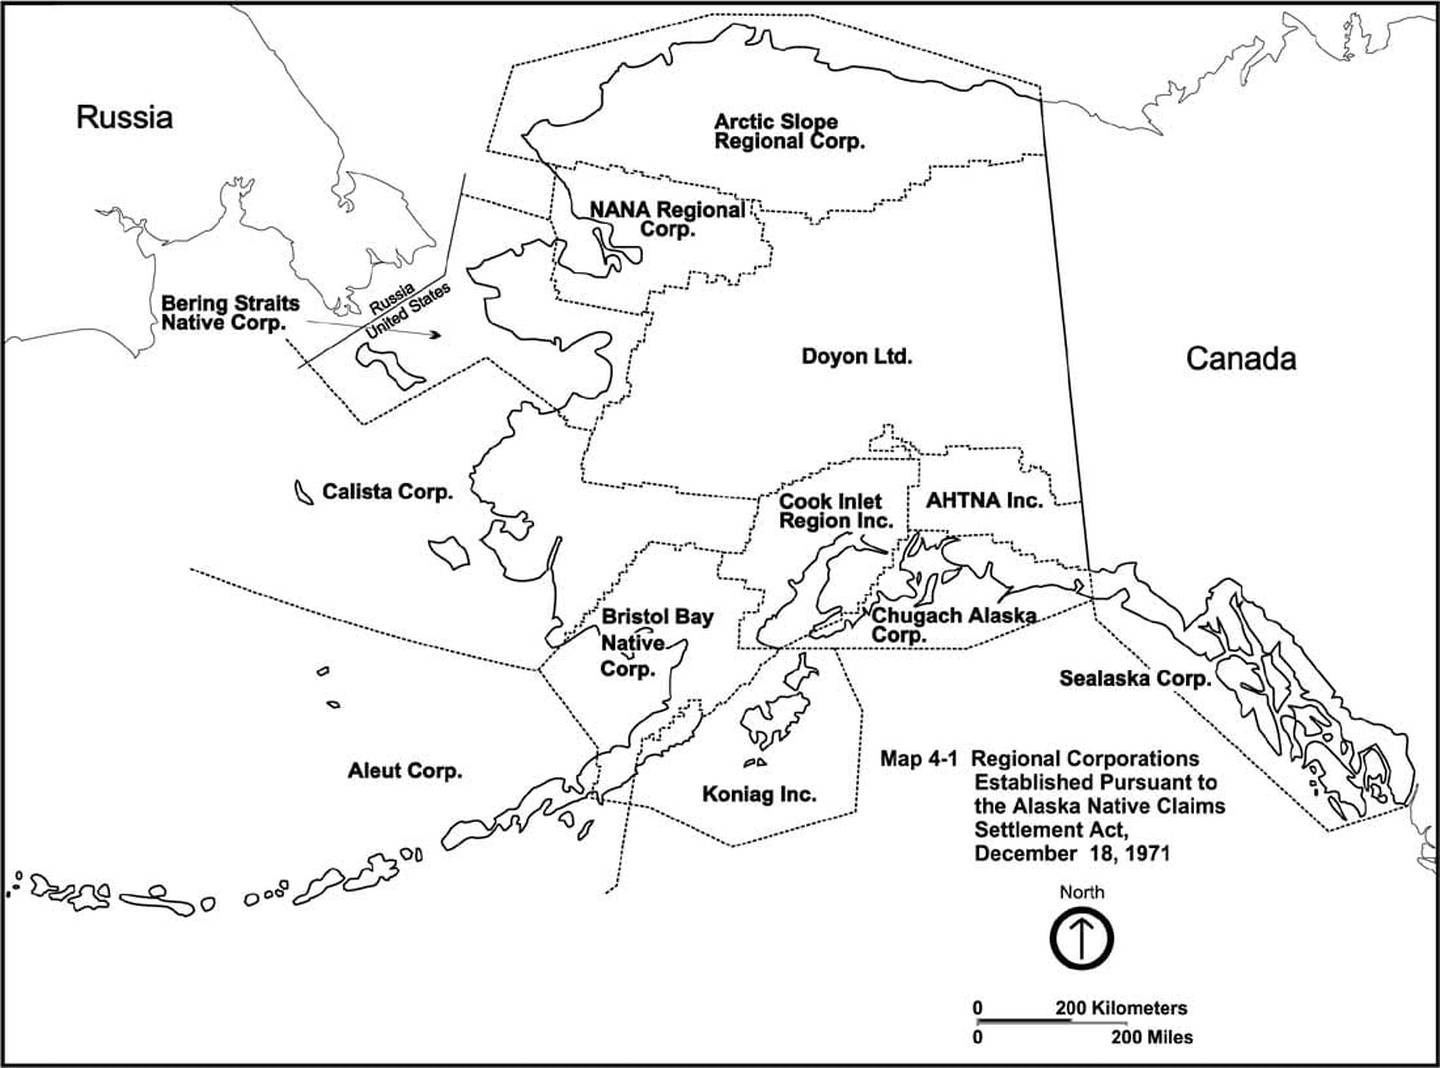 Alaska regional corporations map as designated by the Alaska Native Claims Settlement Act. (Photo courtesy of the National Park Service)